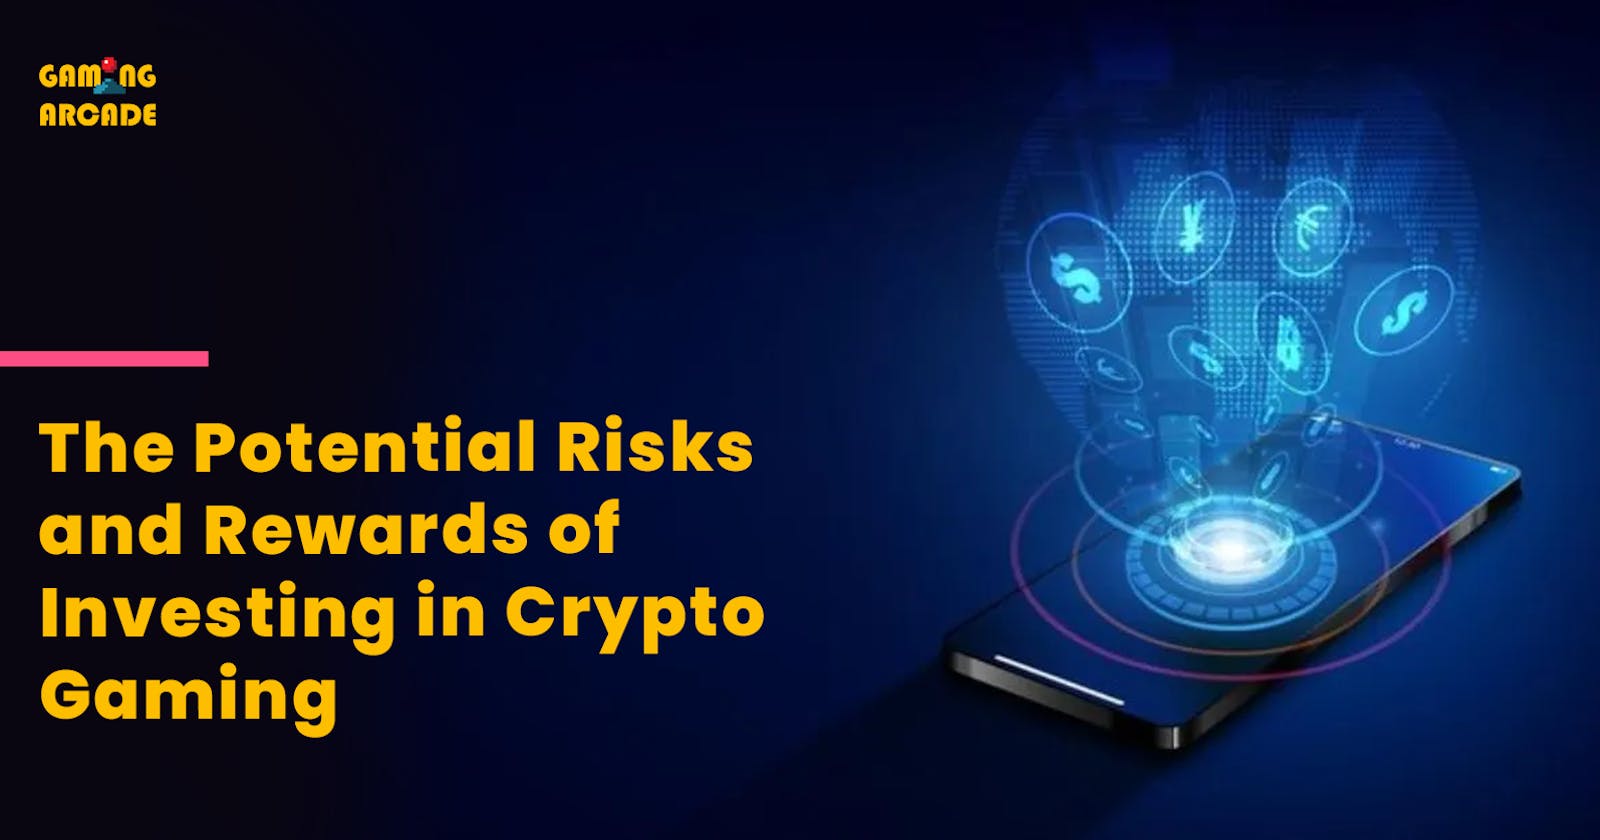 The Potential Risks and Rewards of Investing in Crypto Gaming